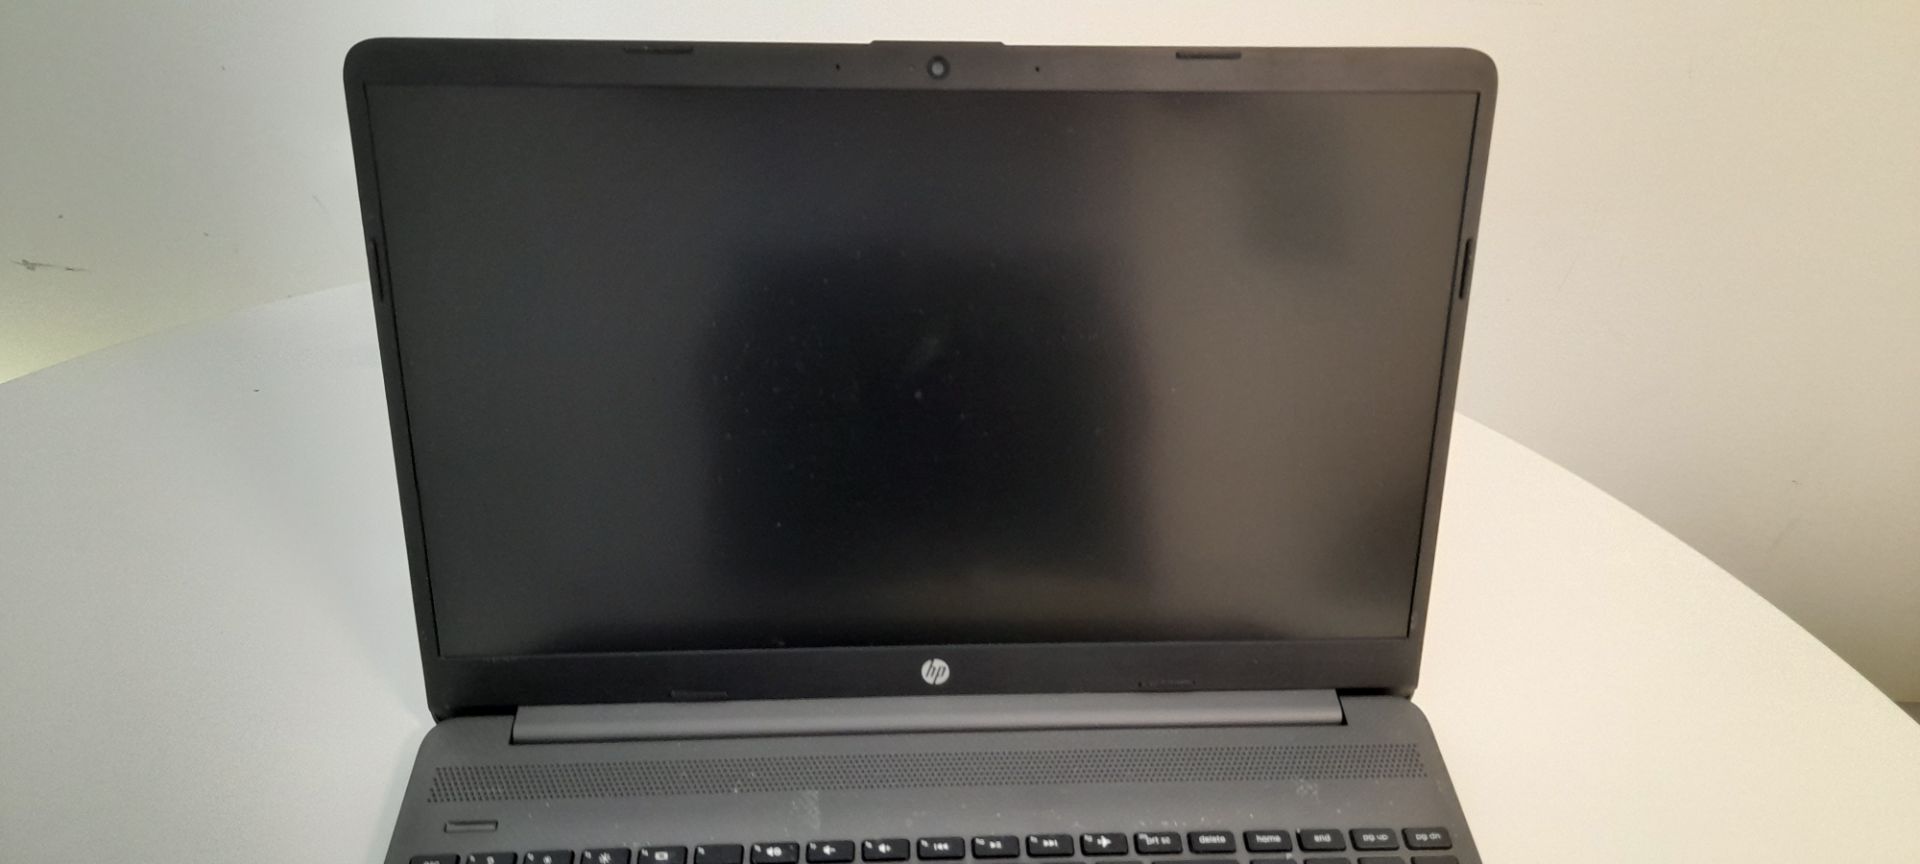 HP 250 G8 laptop with intel core i5. Collection from Canary Wharf, London, E14 - Image 5 of 7